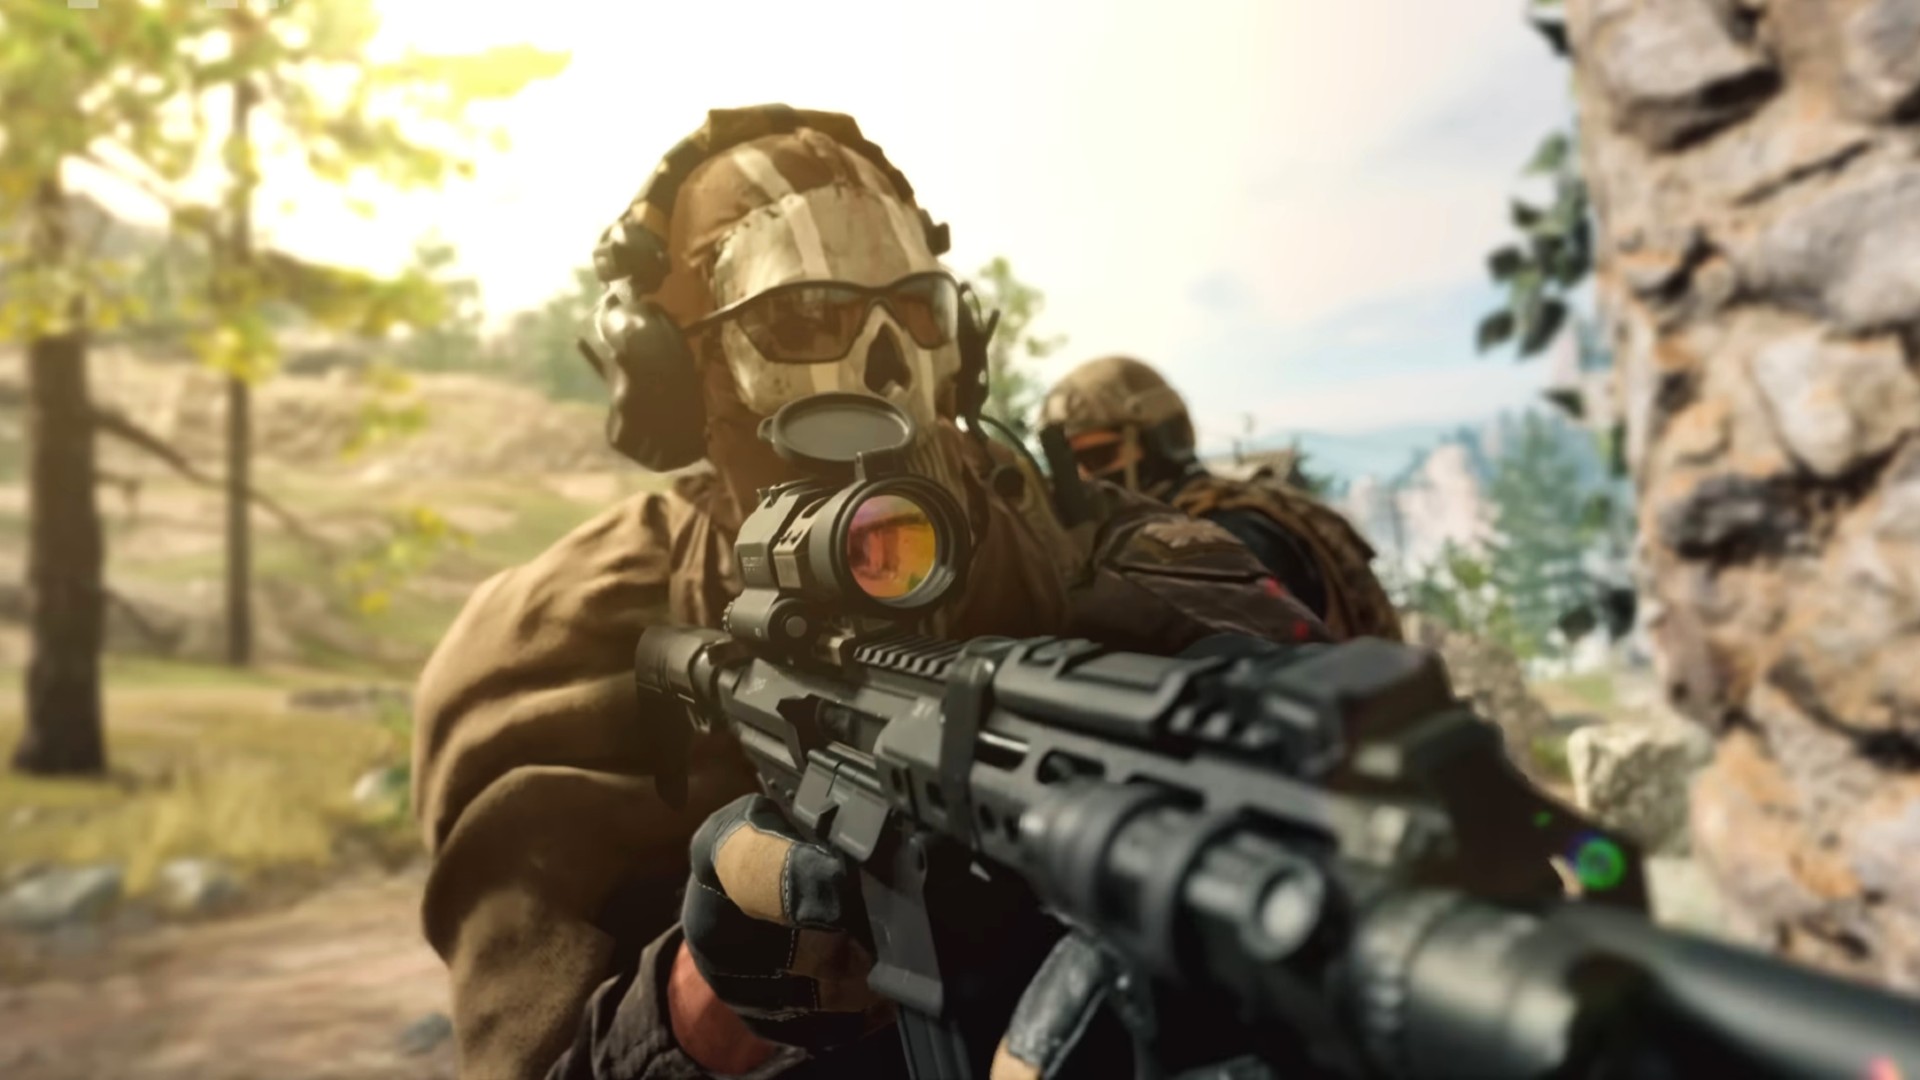 Best FPS Games: Ghost staring down the barrel of a gun in Warzone 2